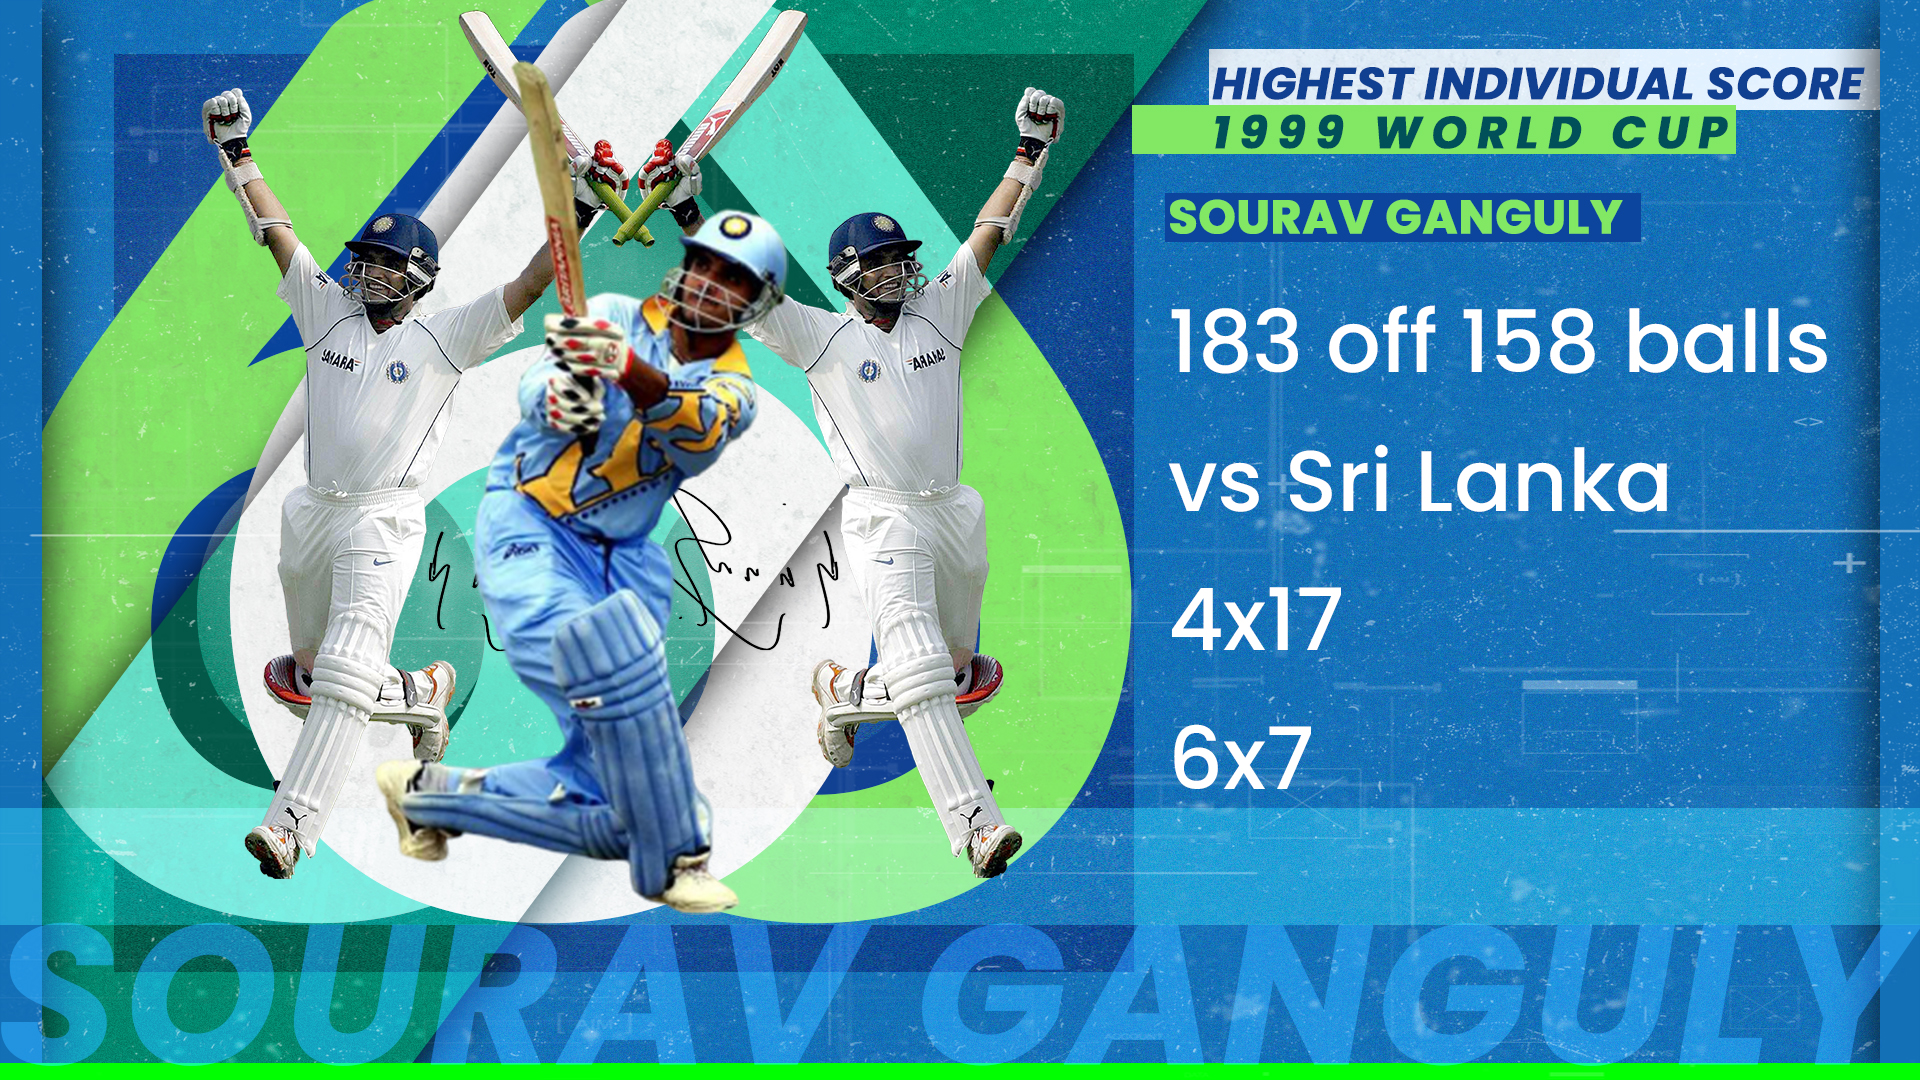 Sourav Ganguly scored 183 against Sri Lanka which was the highest individual score in the 1999 World Cup.